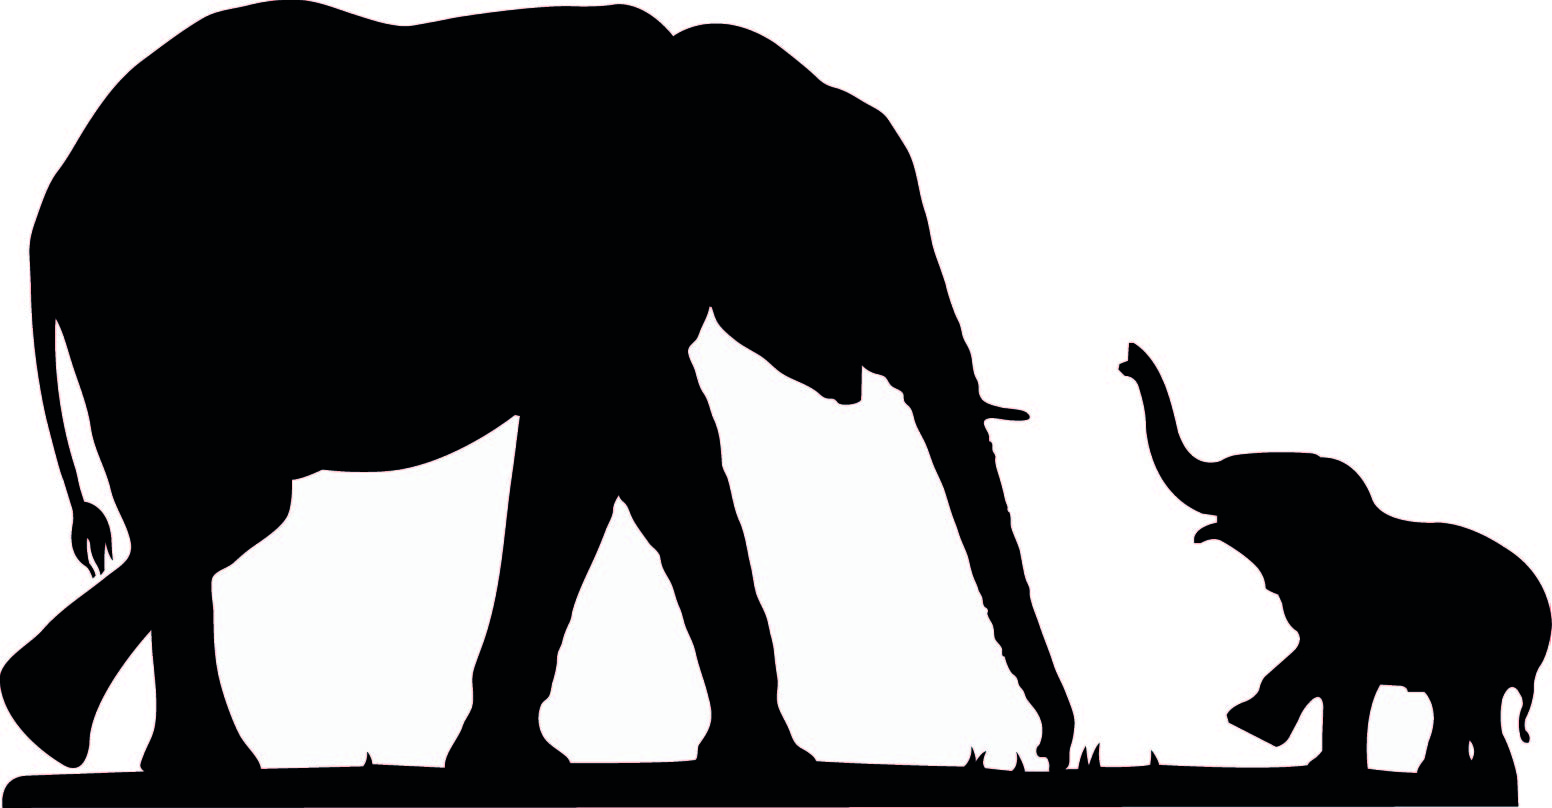 Cute Elephant Silhouette | Free download on ClipArtMag